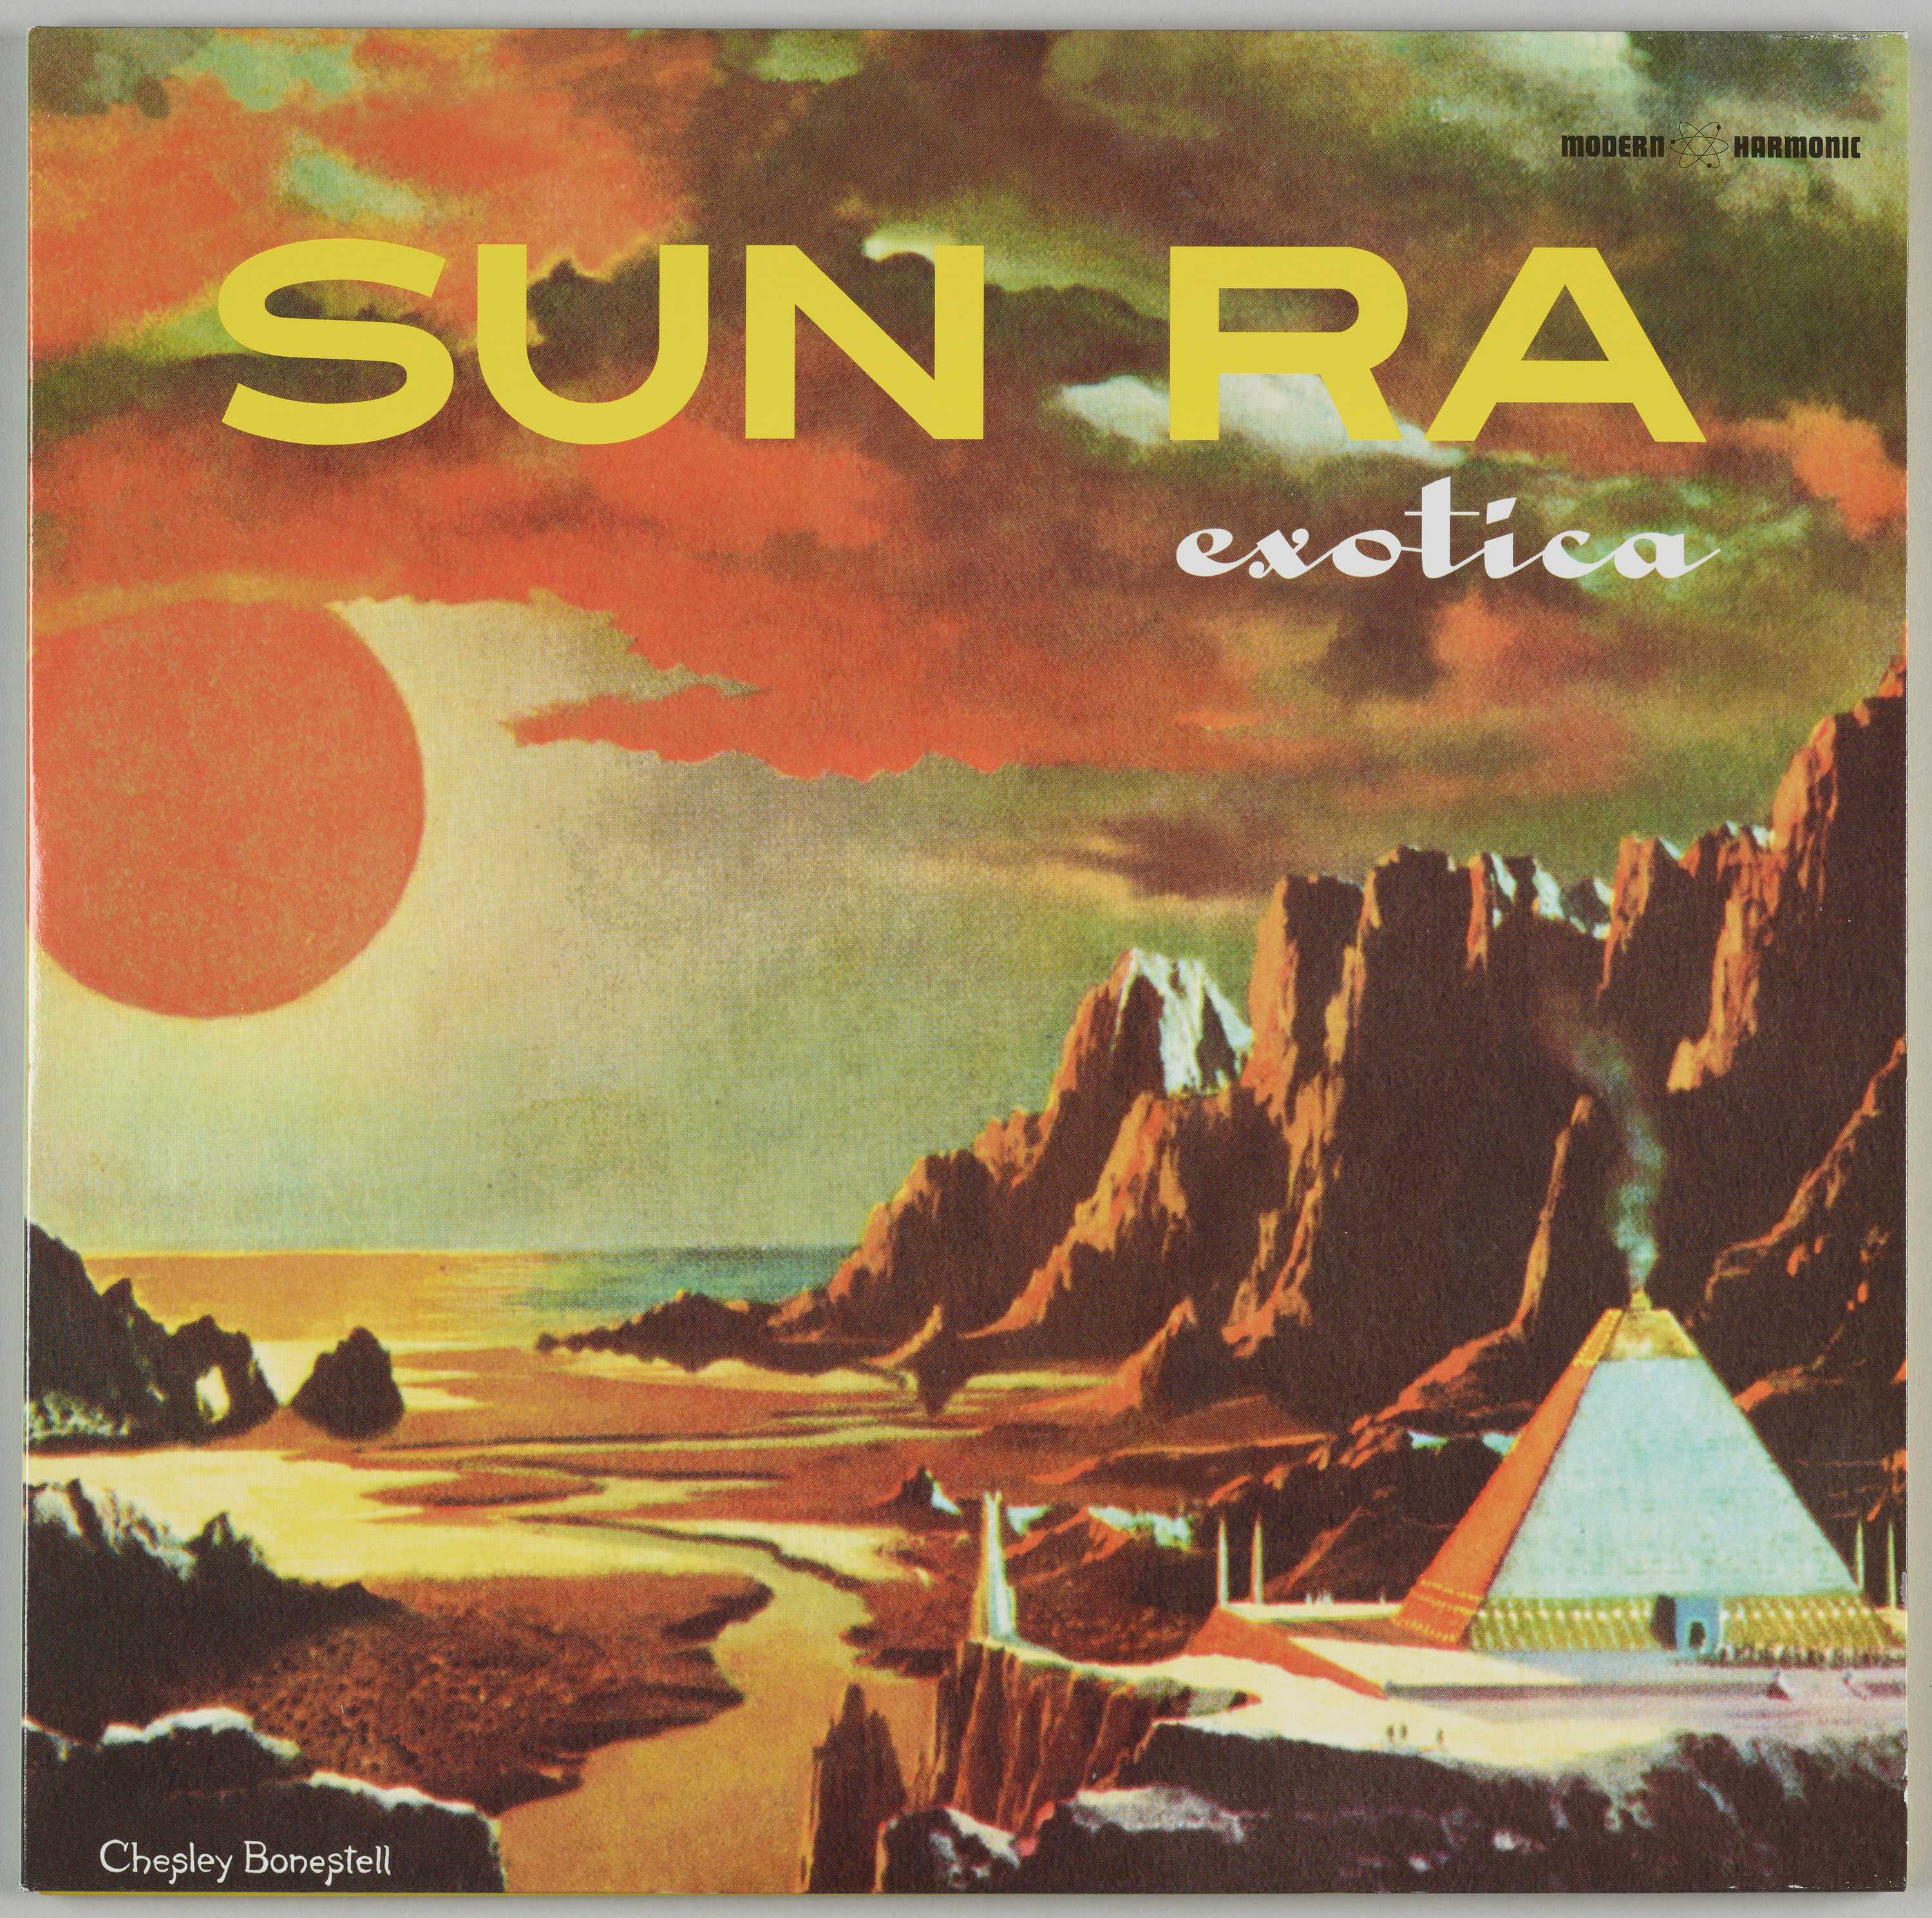 A cosmic jazz album cover featuring Sun Ra's 'Exotica' in bold typography amidst bright colors and shapes.